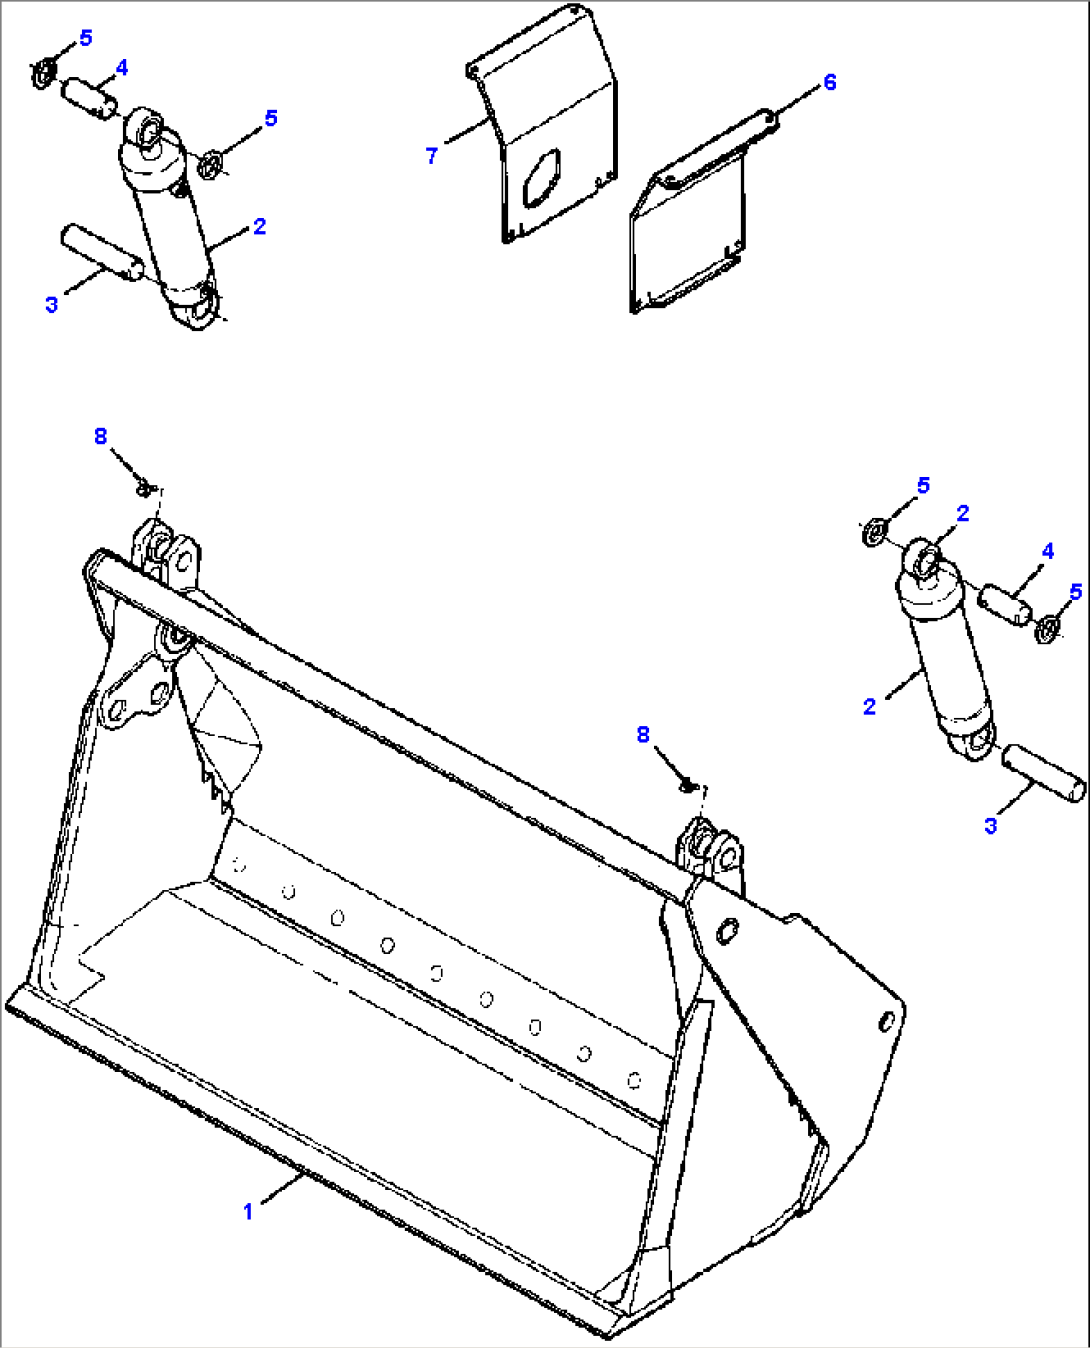 MULTI-PURPOSE BUCKET COMPLETE ASSEMBLY